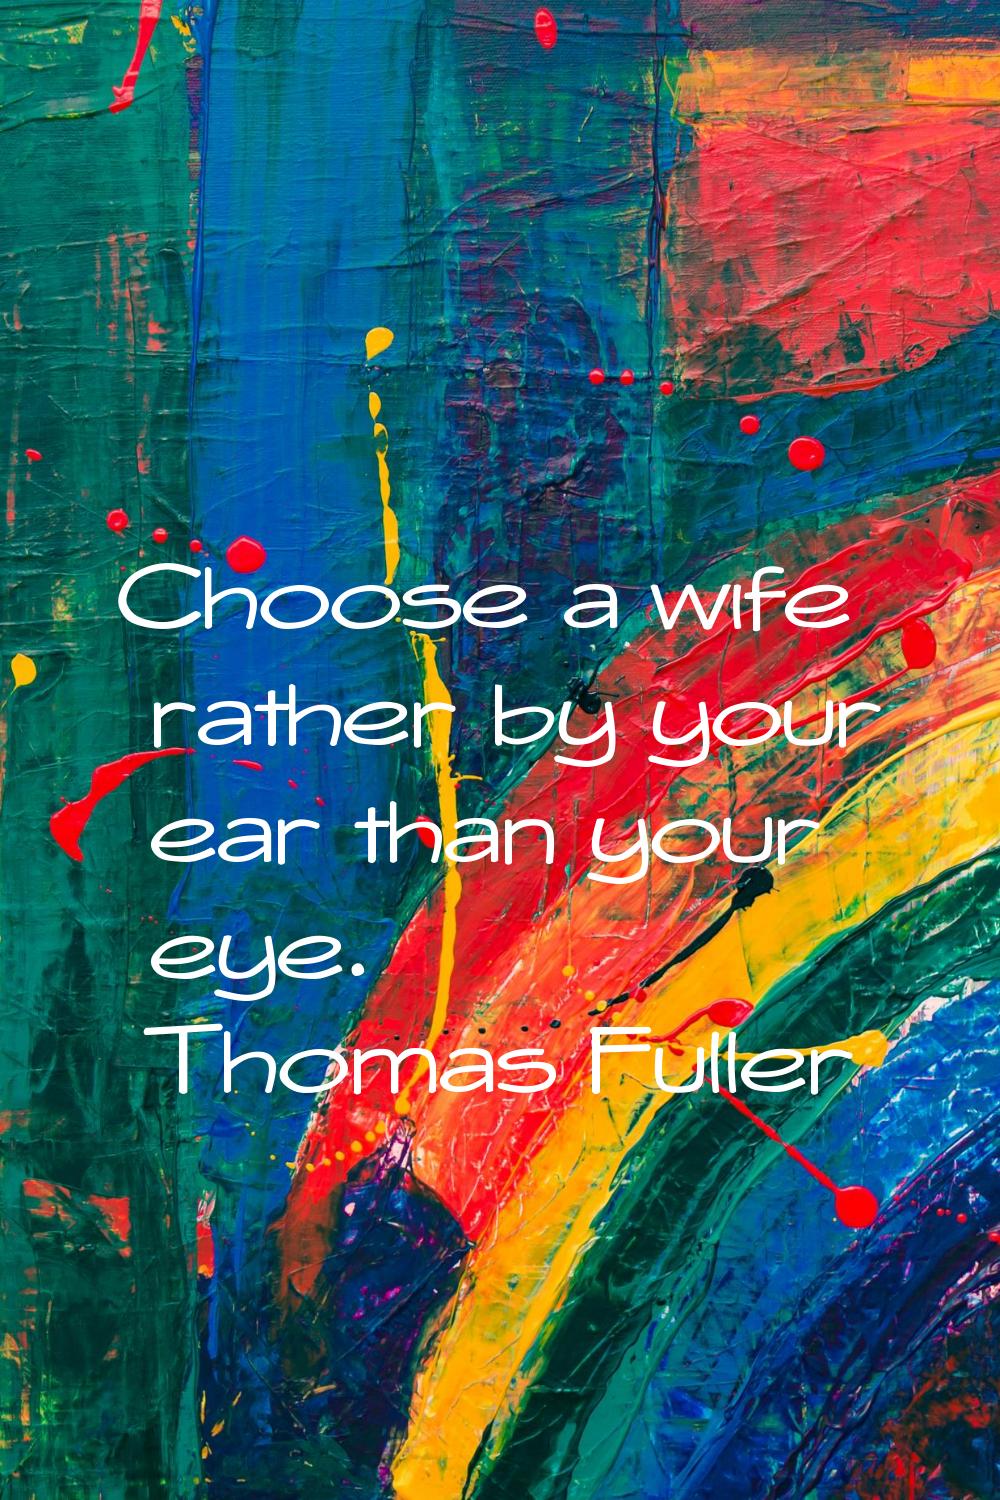 Choose a wife rather by your ear than your eye.